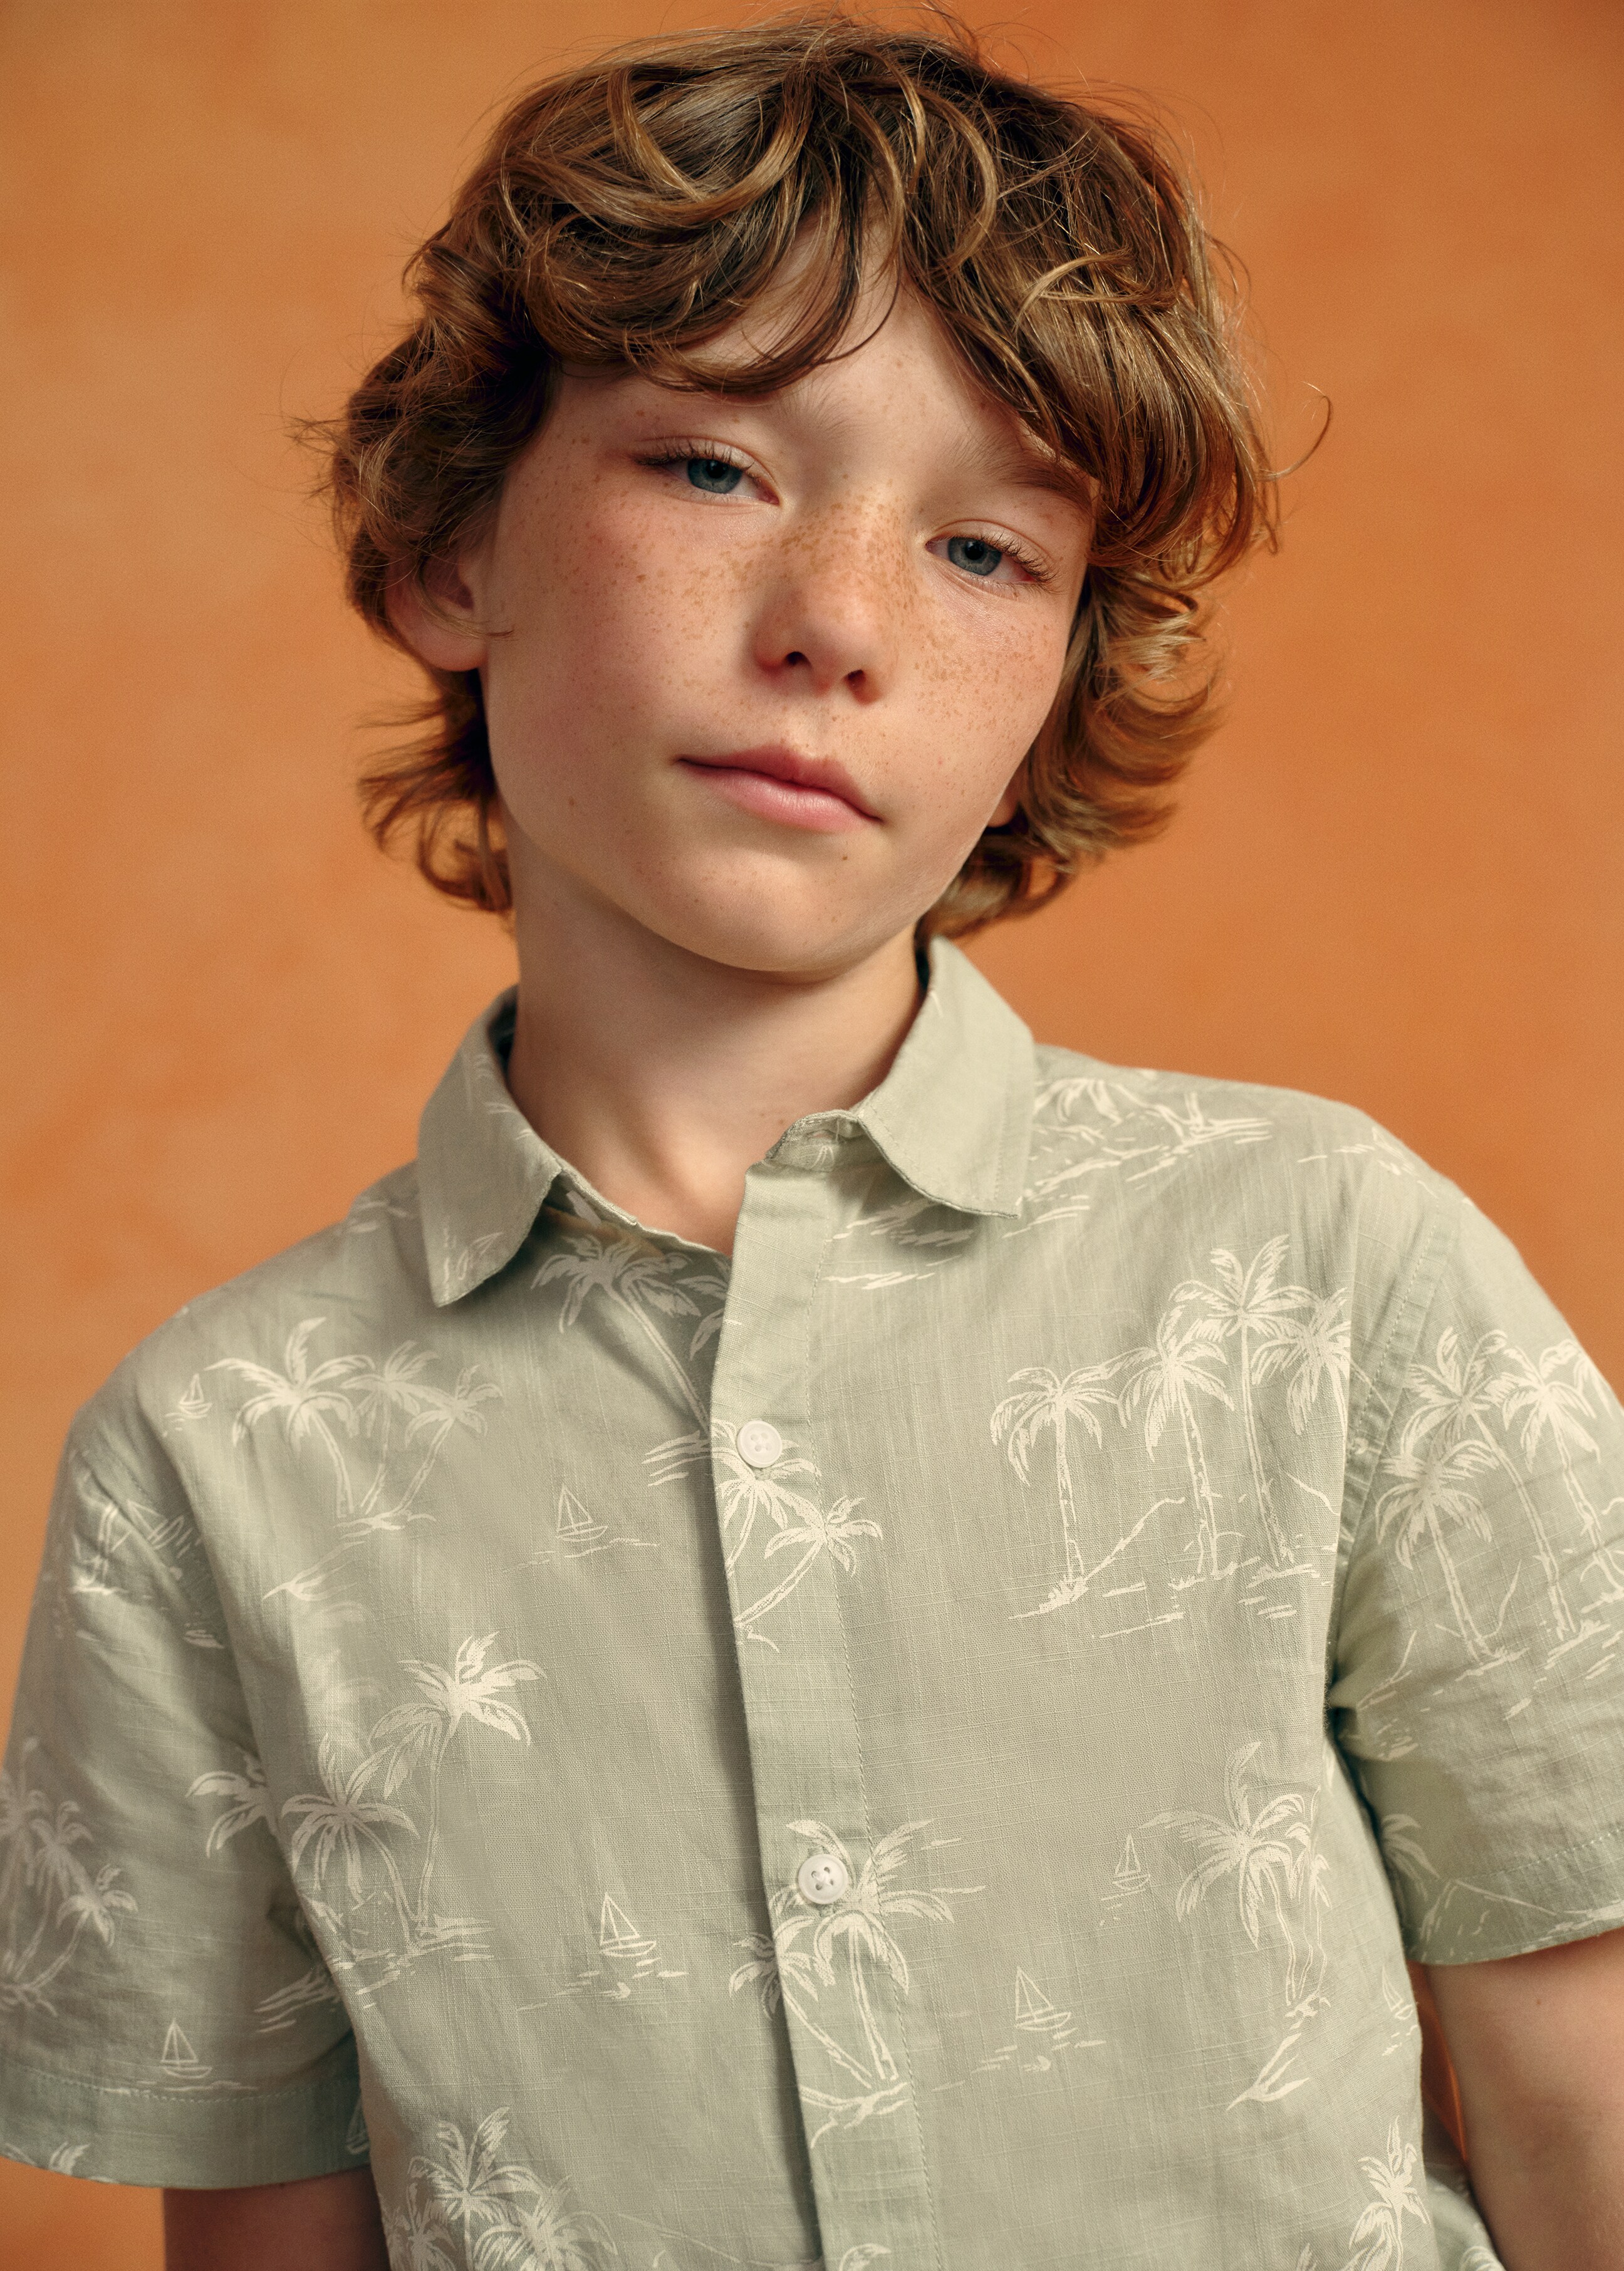 Tropical print shirt - Details of the article 6